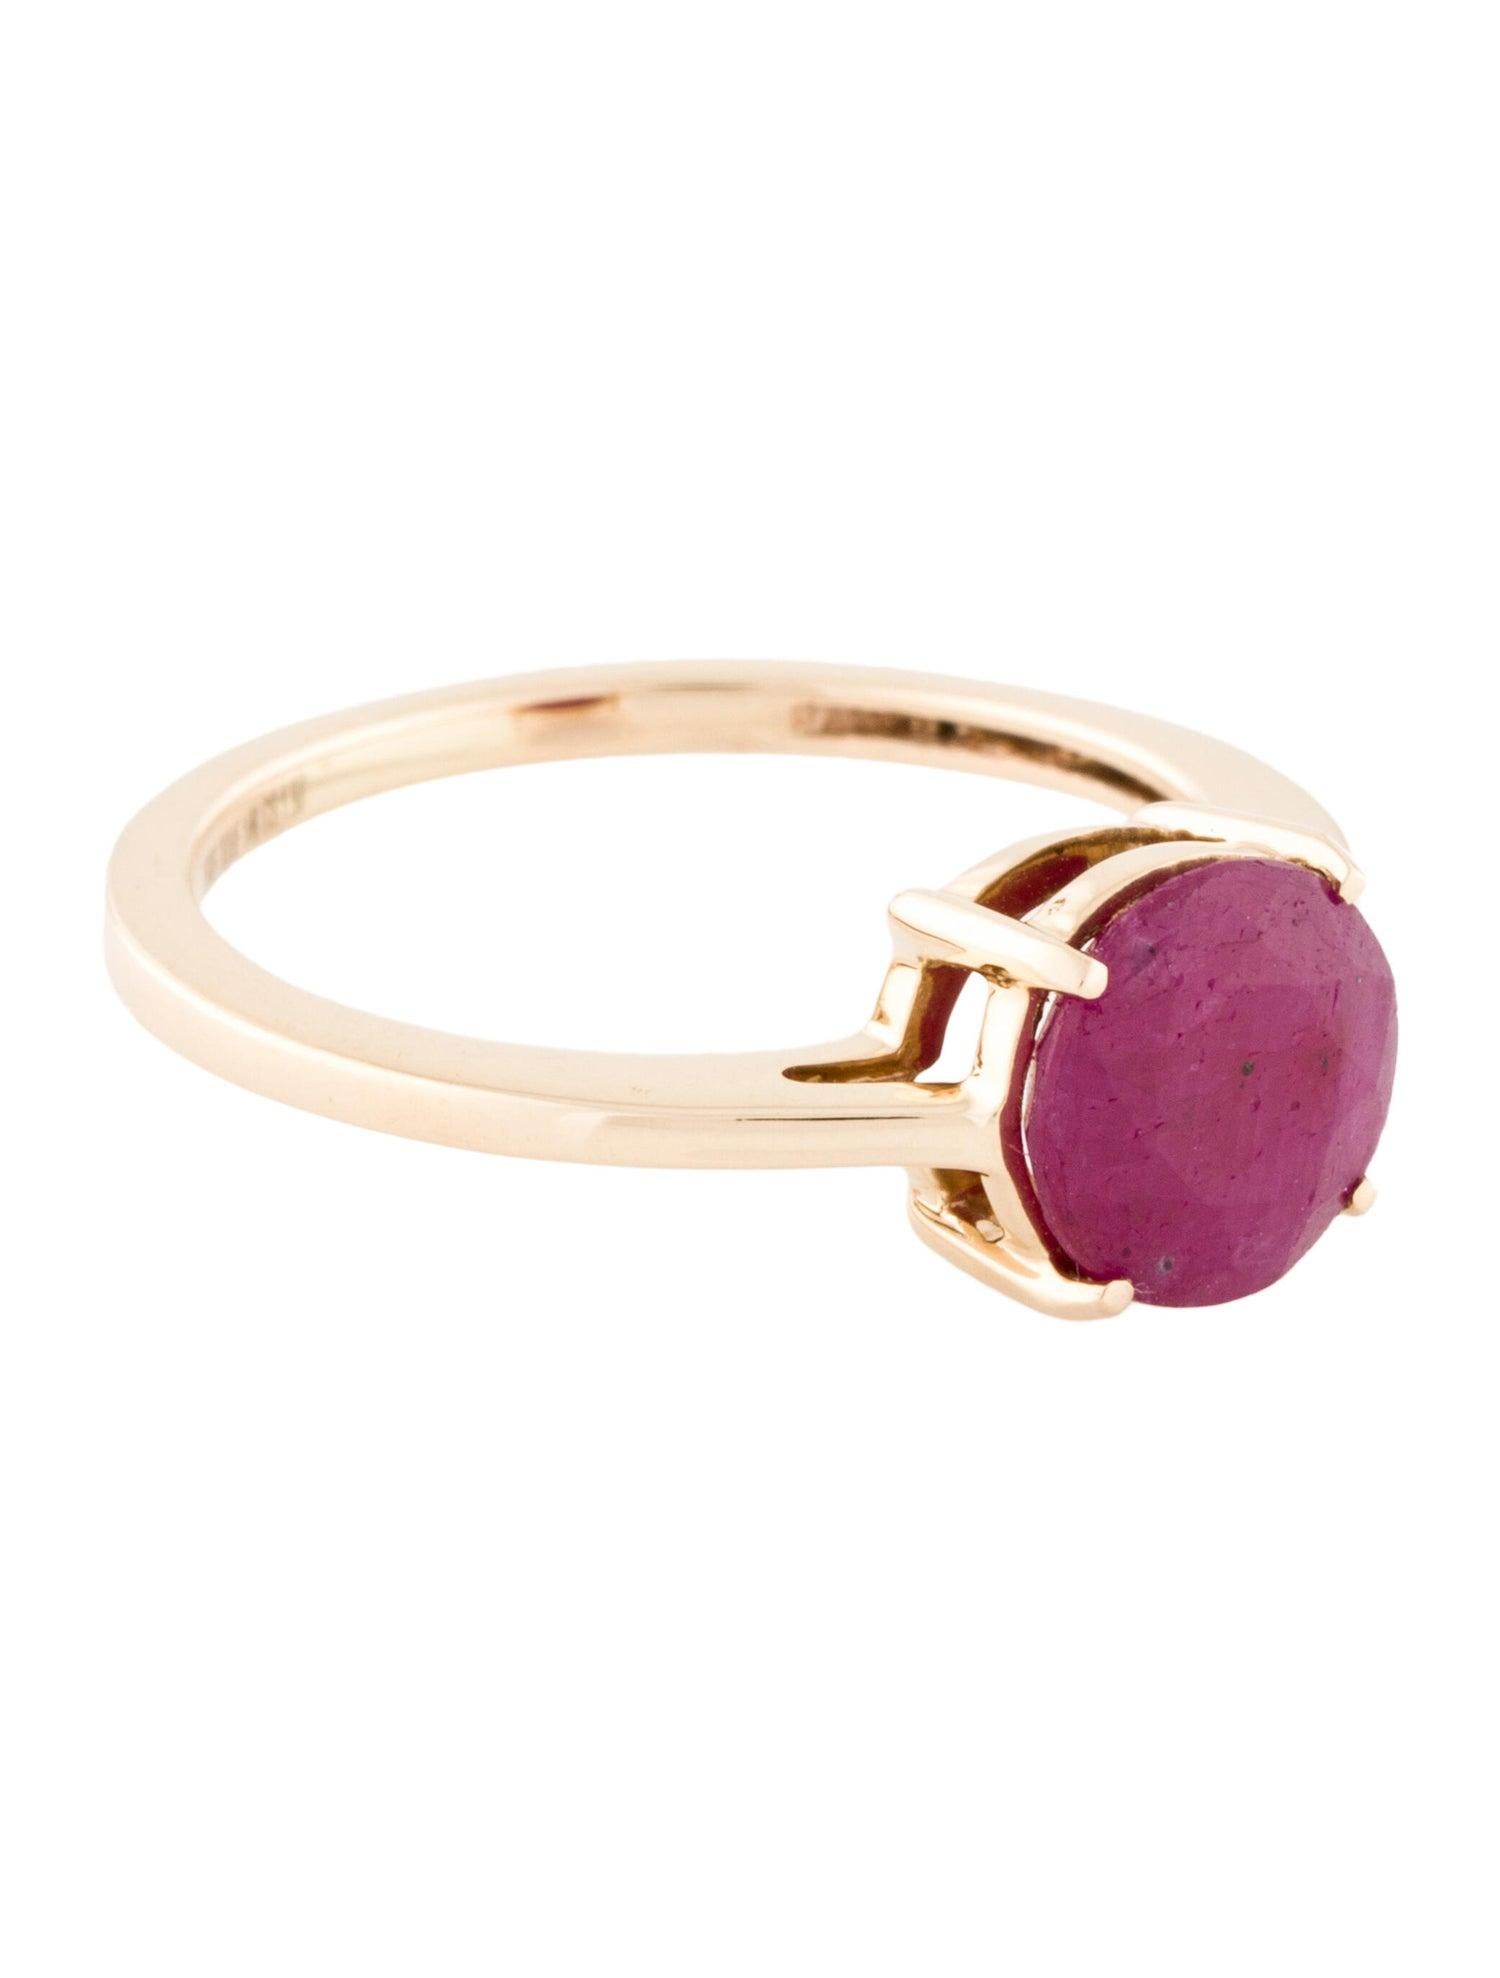 Evoke the fiery passion of nature's blooms with our Blooms of Passion Ruby Ring. This exquisite piece from Jeweltique's renowned Ruby collection encapsulates the vibrant beauty of rich red rubies set against the warm embrace of 14k Yellow